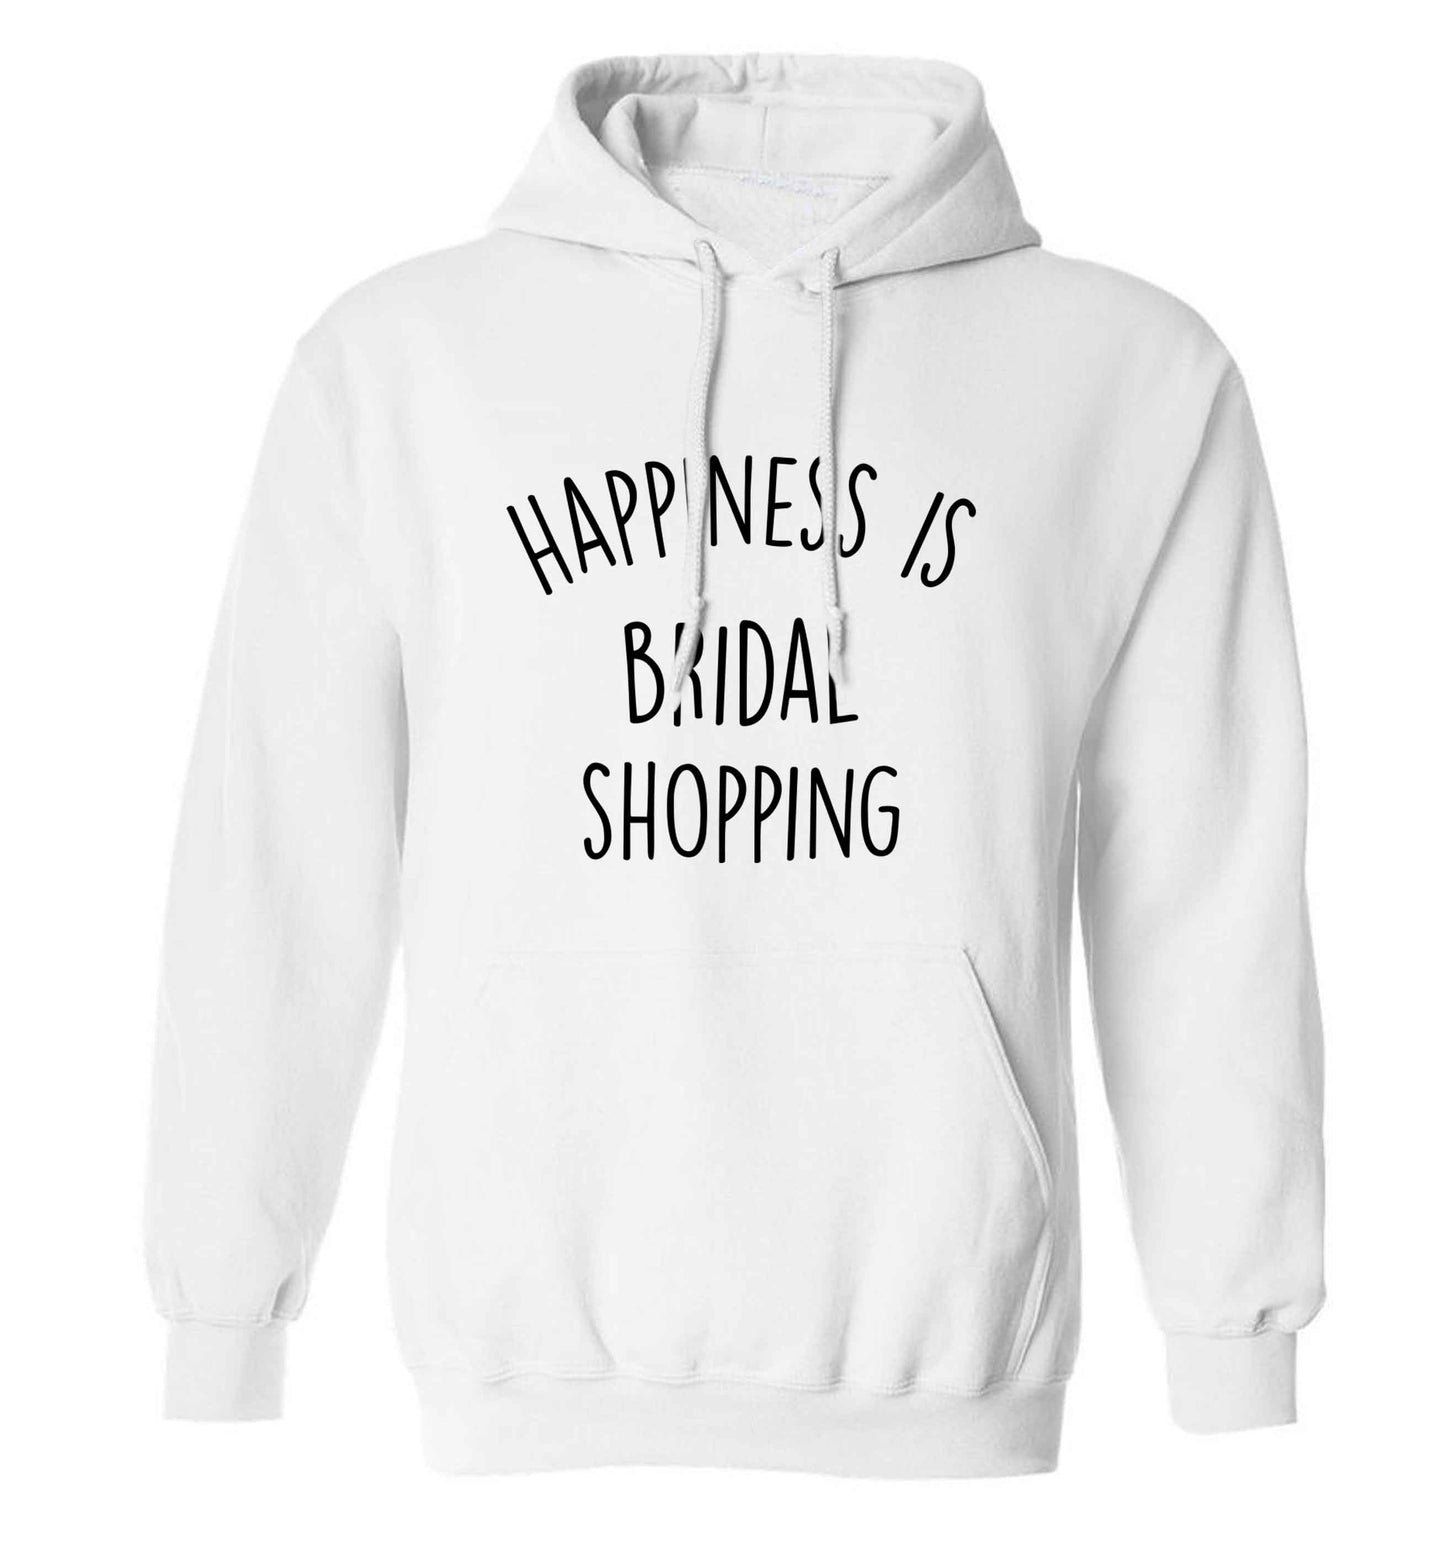 Happiness is bridal shopping adults unisex white hoodie 2XL